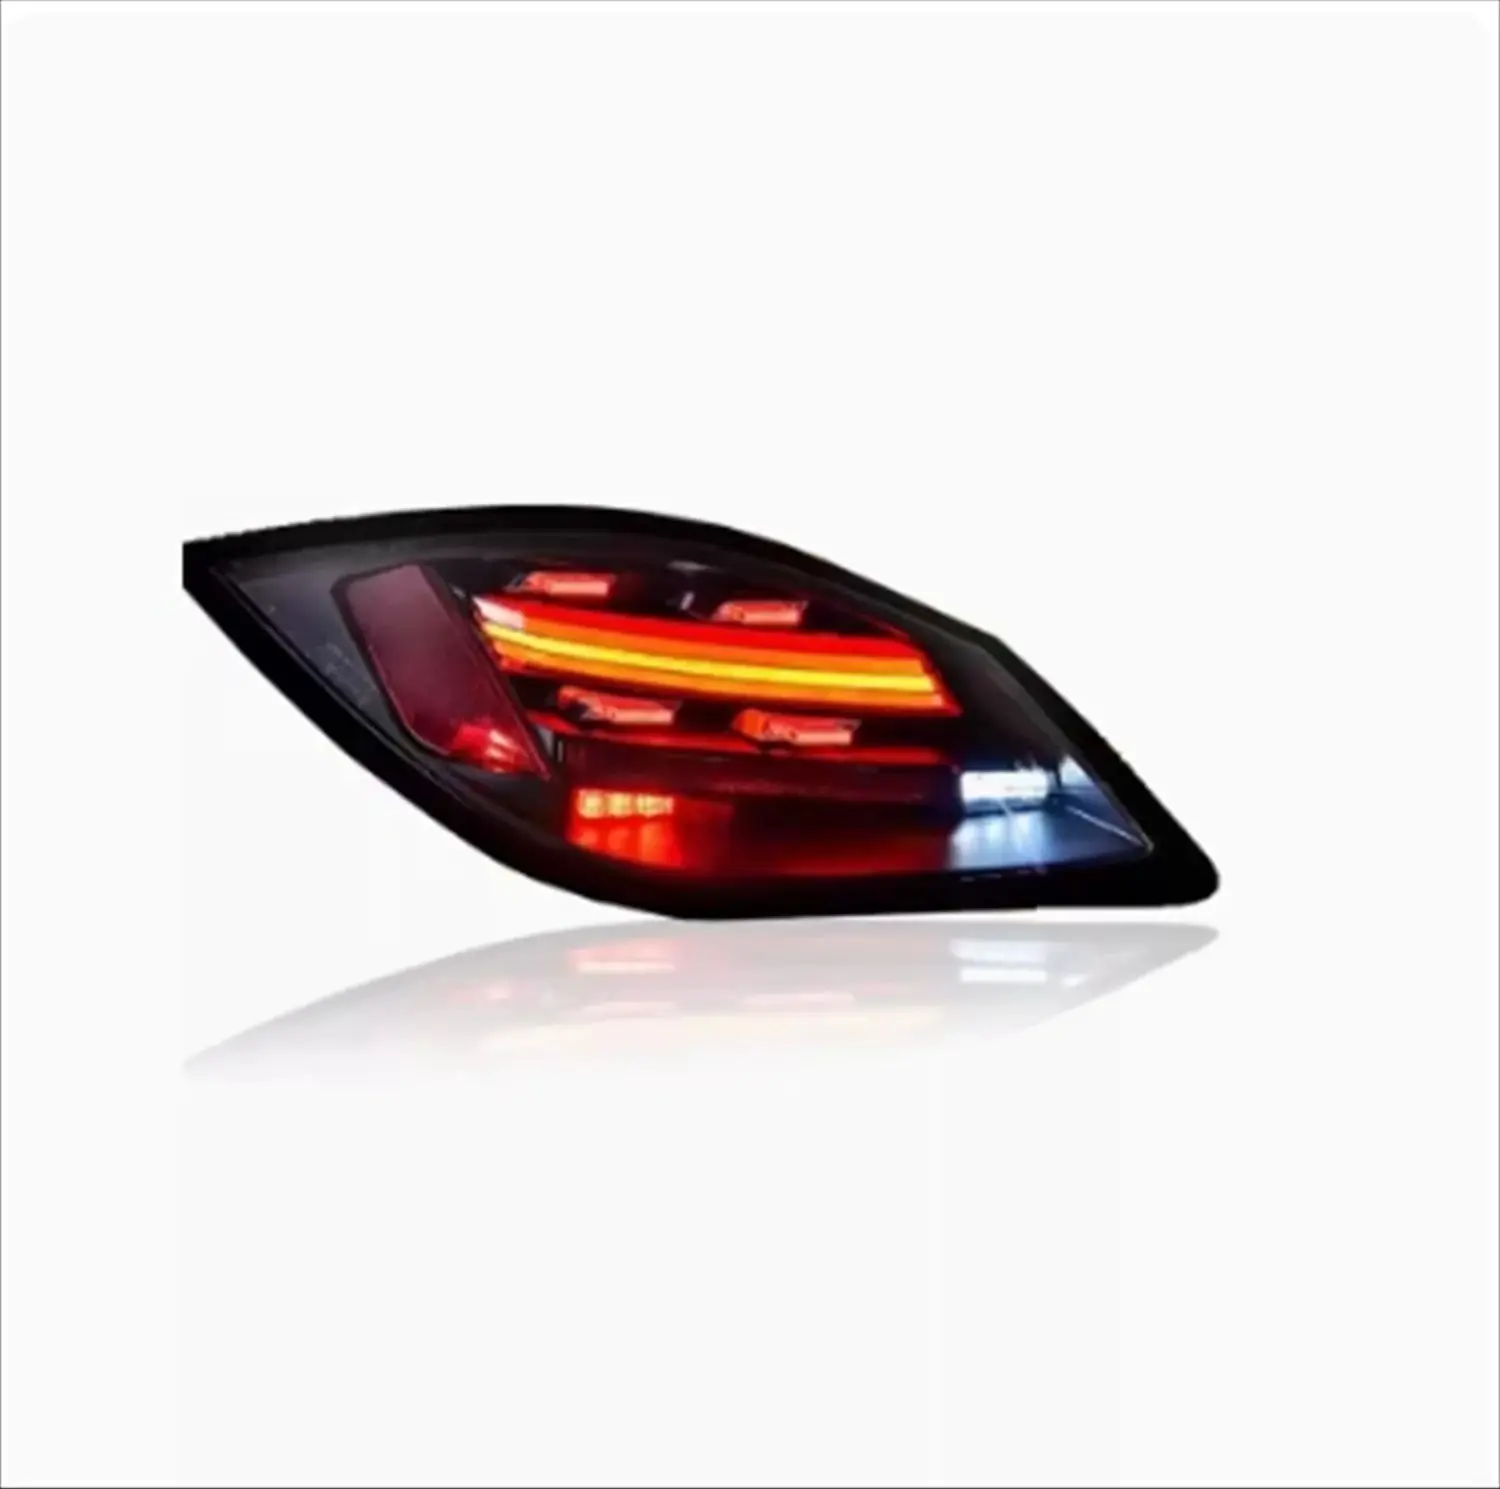 

Car Rear Lamp Tail Light Taillight for Porsche Boxster 04-12 Modified Cayman 987.2 Brake Driving Reversing Lamp Turn Signal